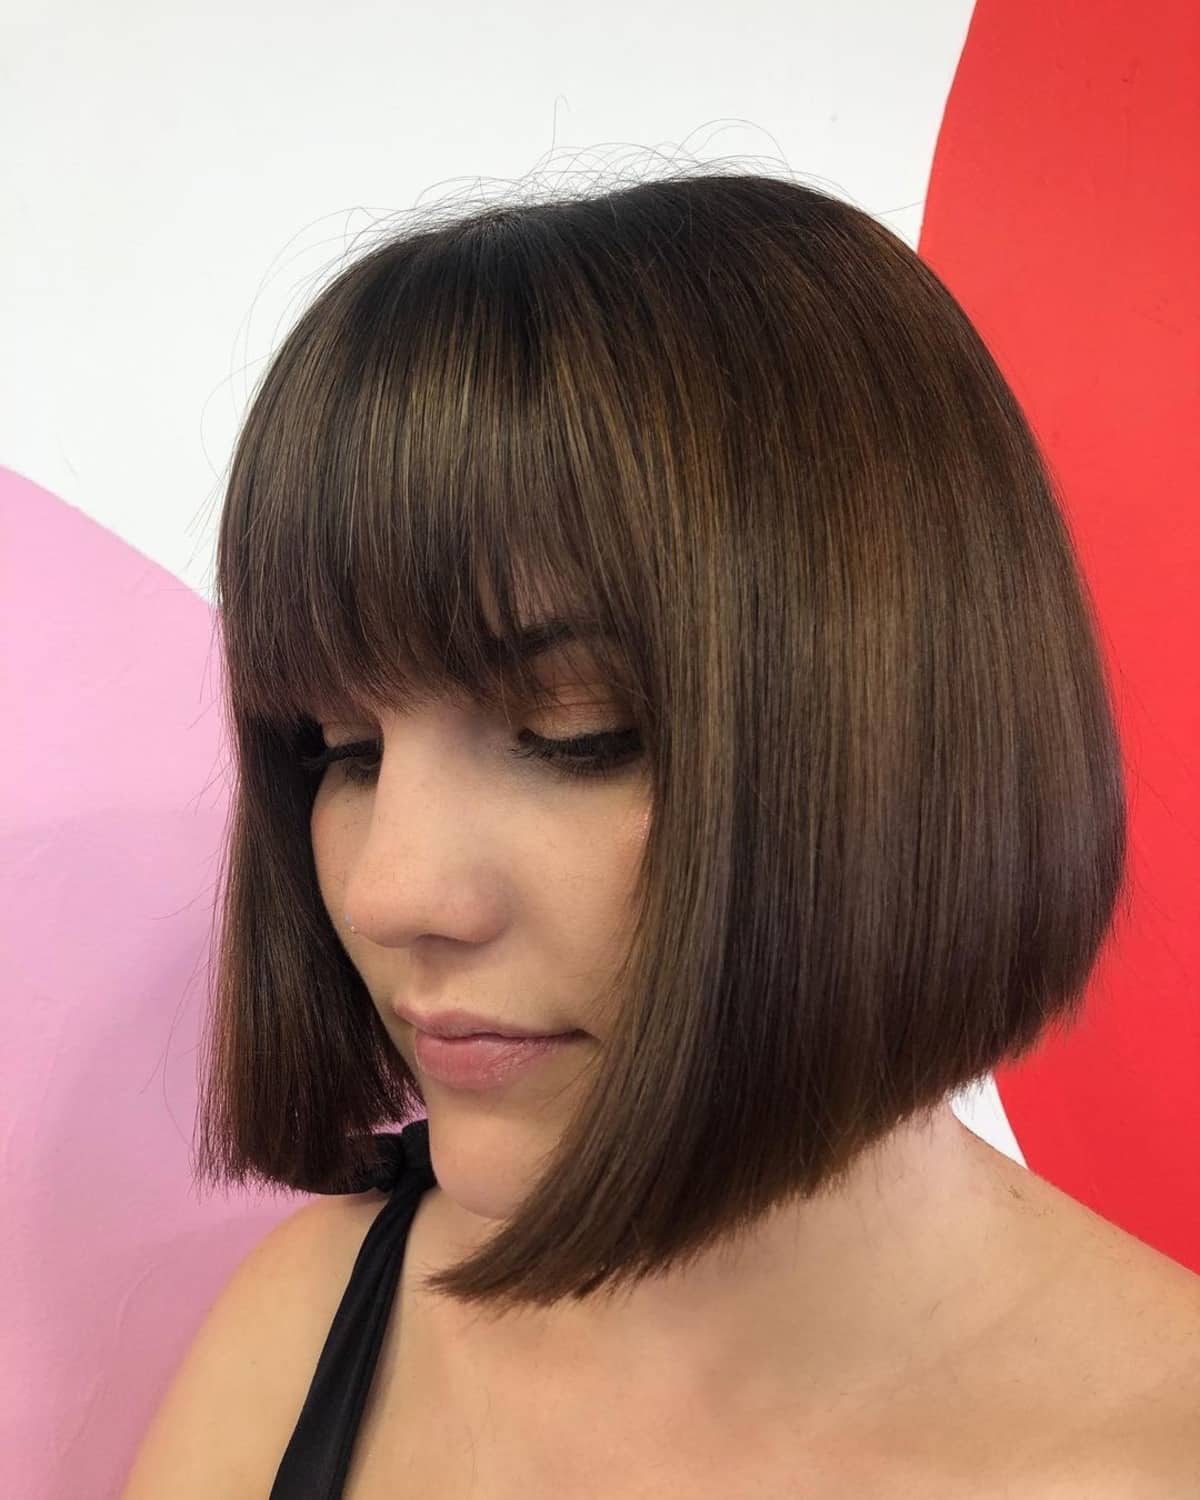 Short Chin-Length Blunt Cut with a Blunt Fringe for Round Face Shapes